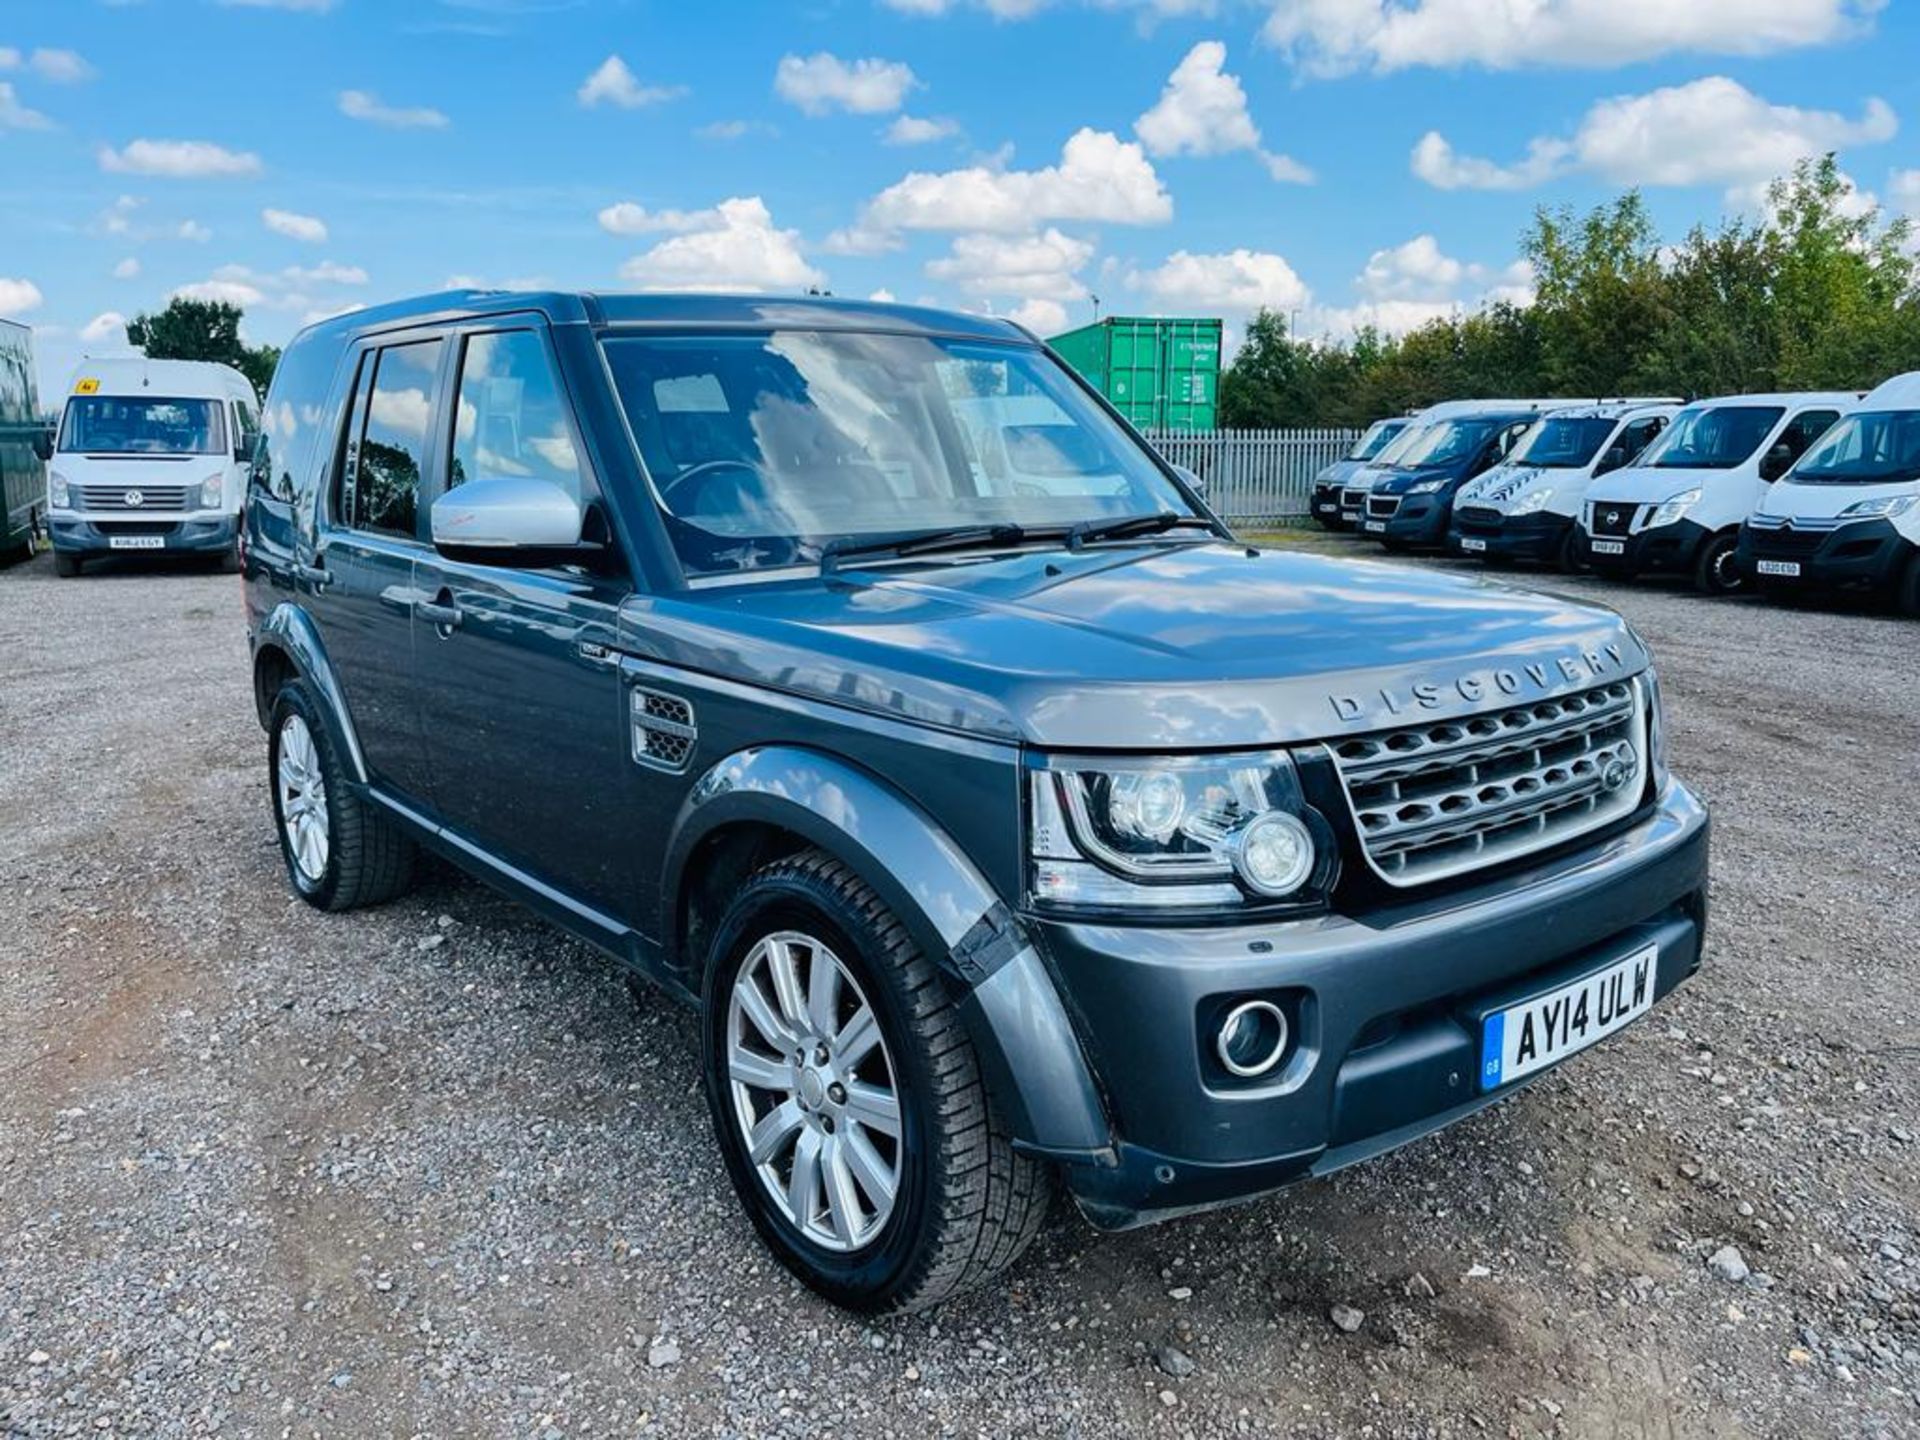 ** ON SALE ** Land Rover Discovery 4 3.0 SDV6 XS CommandShift 2014 '14 Reg' Sat Nav - A/C - 4WD